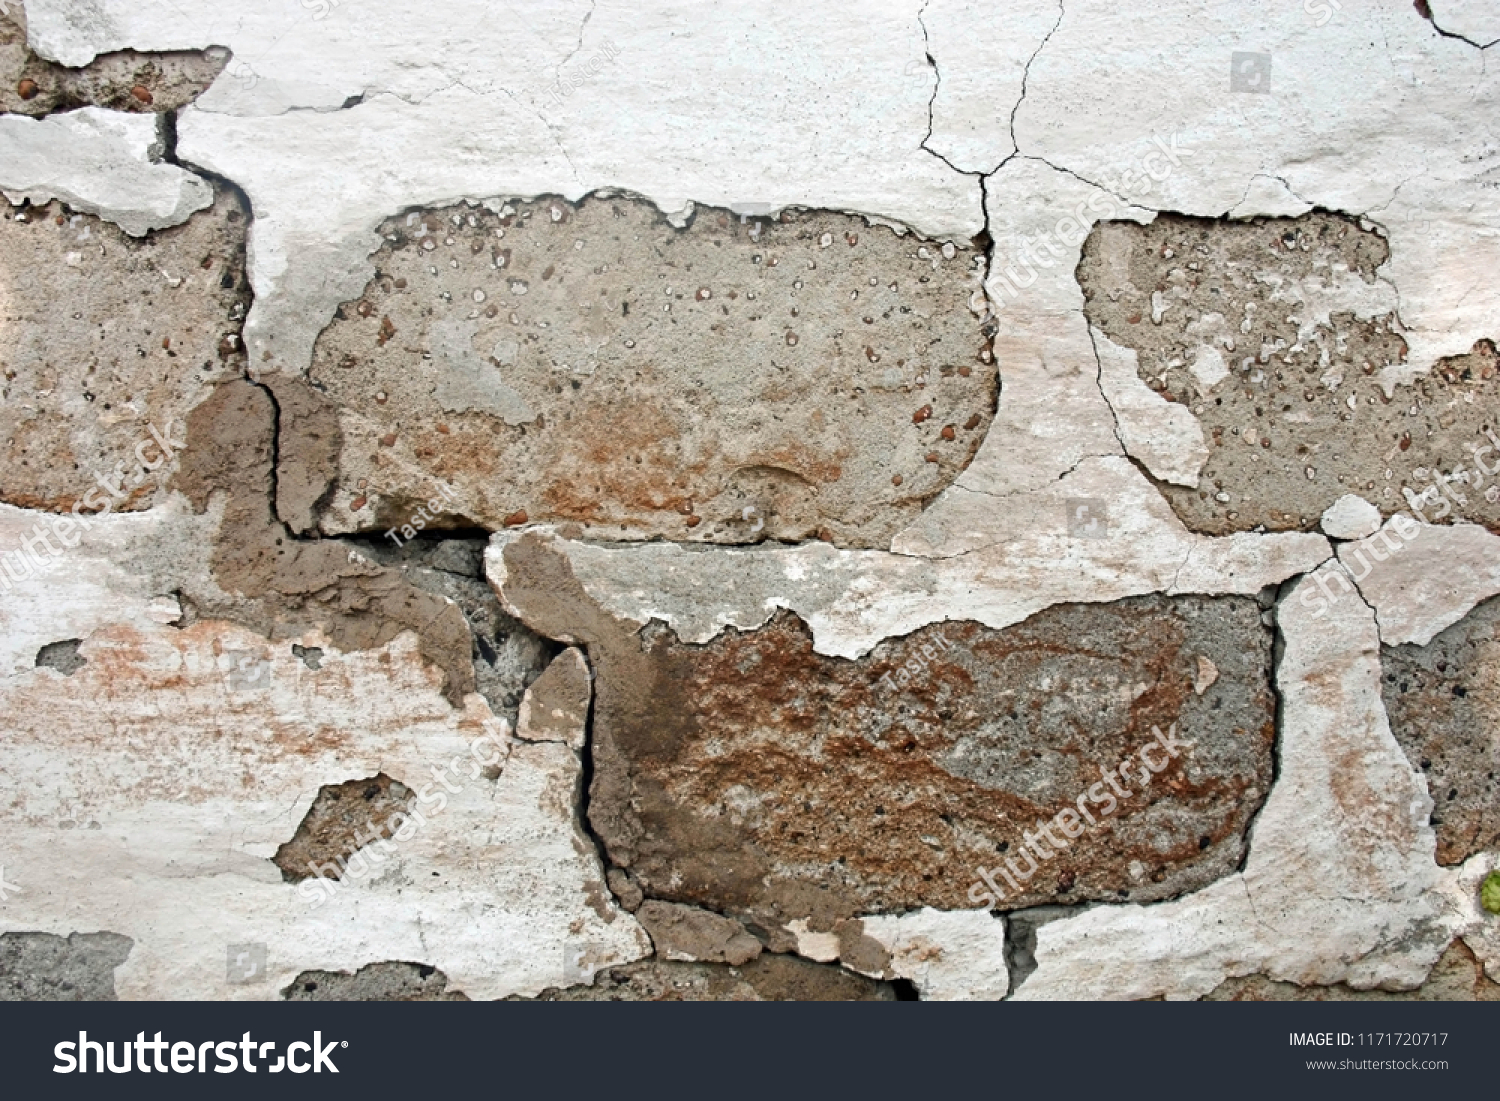 Old damaged brick walll with peeling white plaster. Front view. Texture. #1171720717